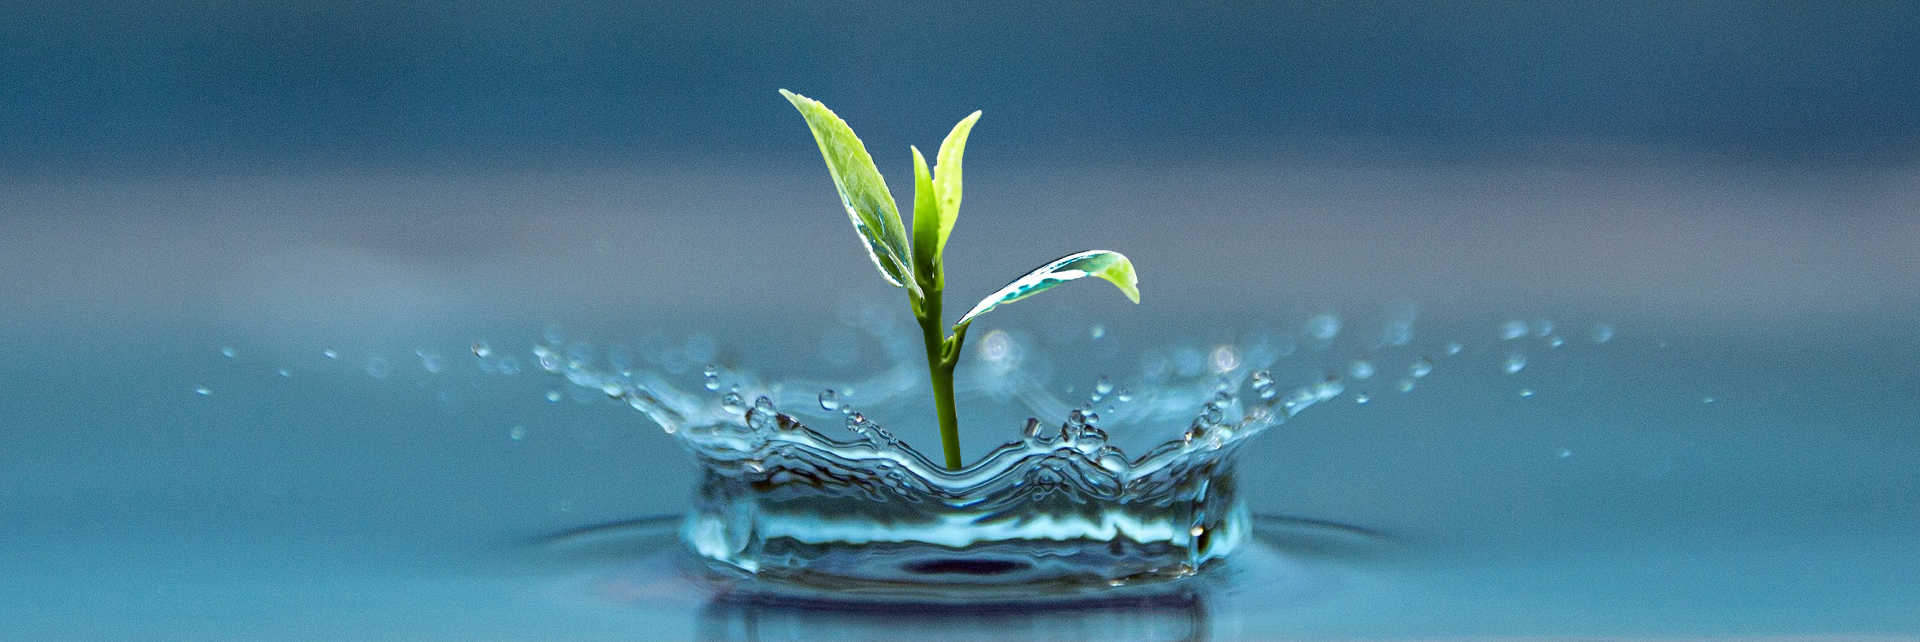 sprout coming up out of a water droplet splash